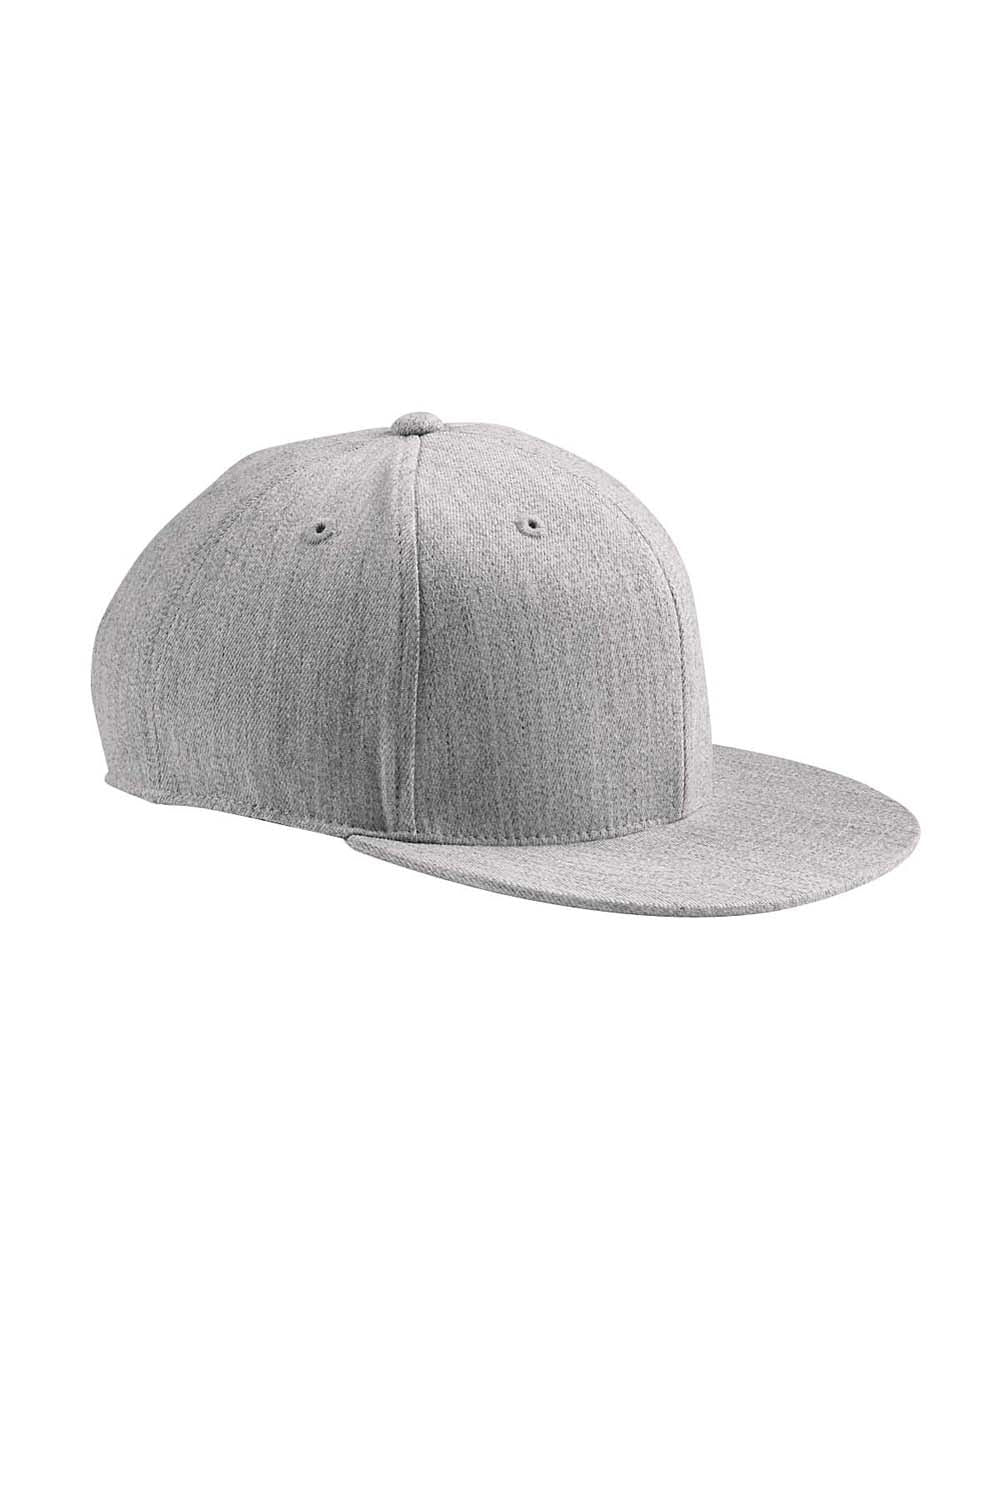 Flexfit 6210 Mens Fitted Stretch Fit Hat Heather Grey Front